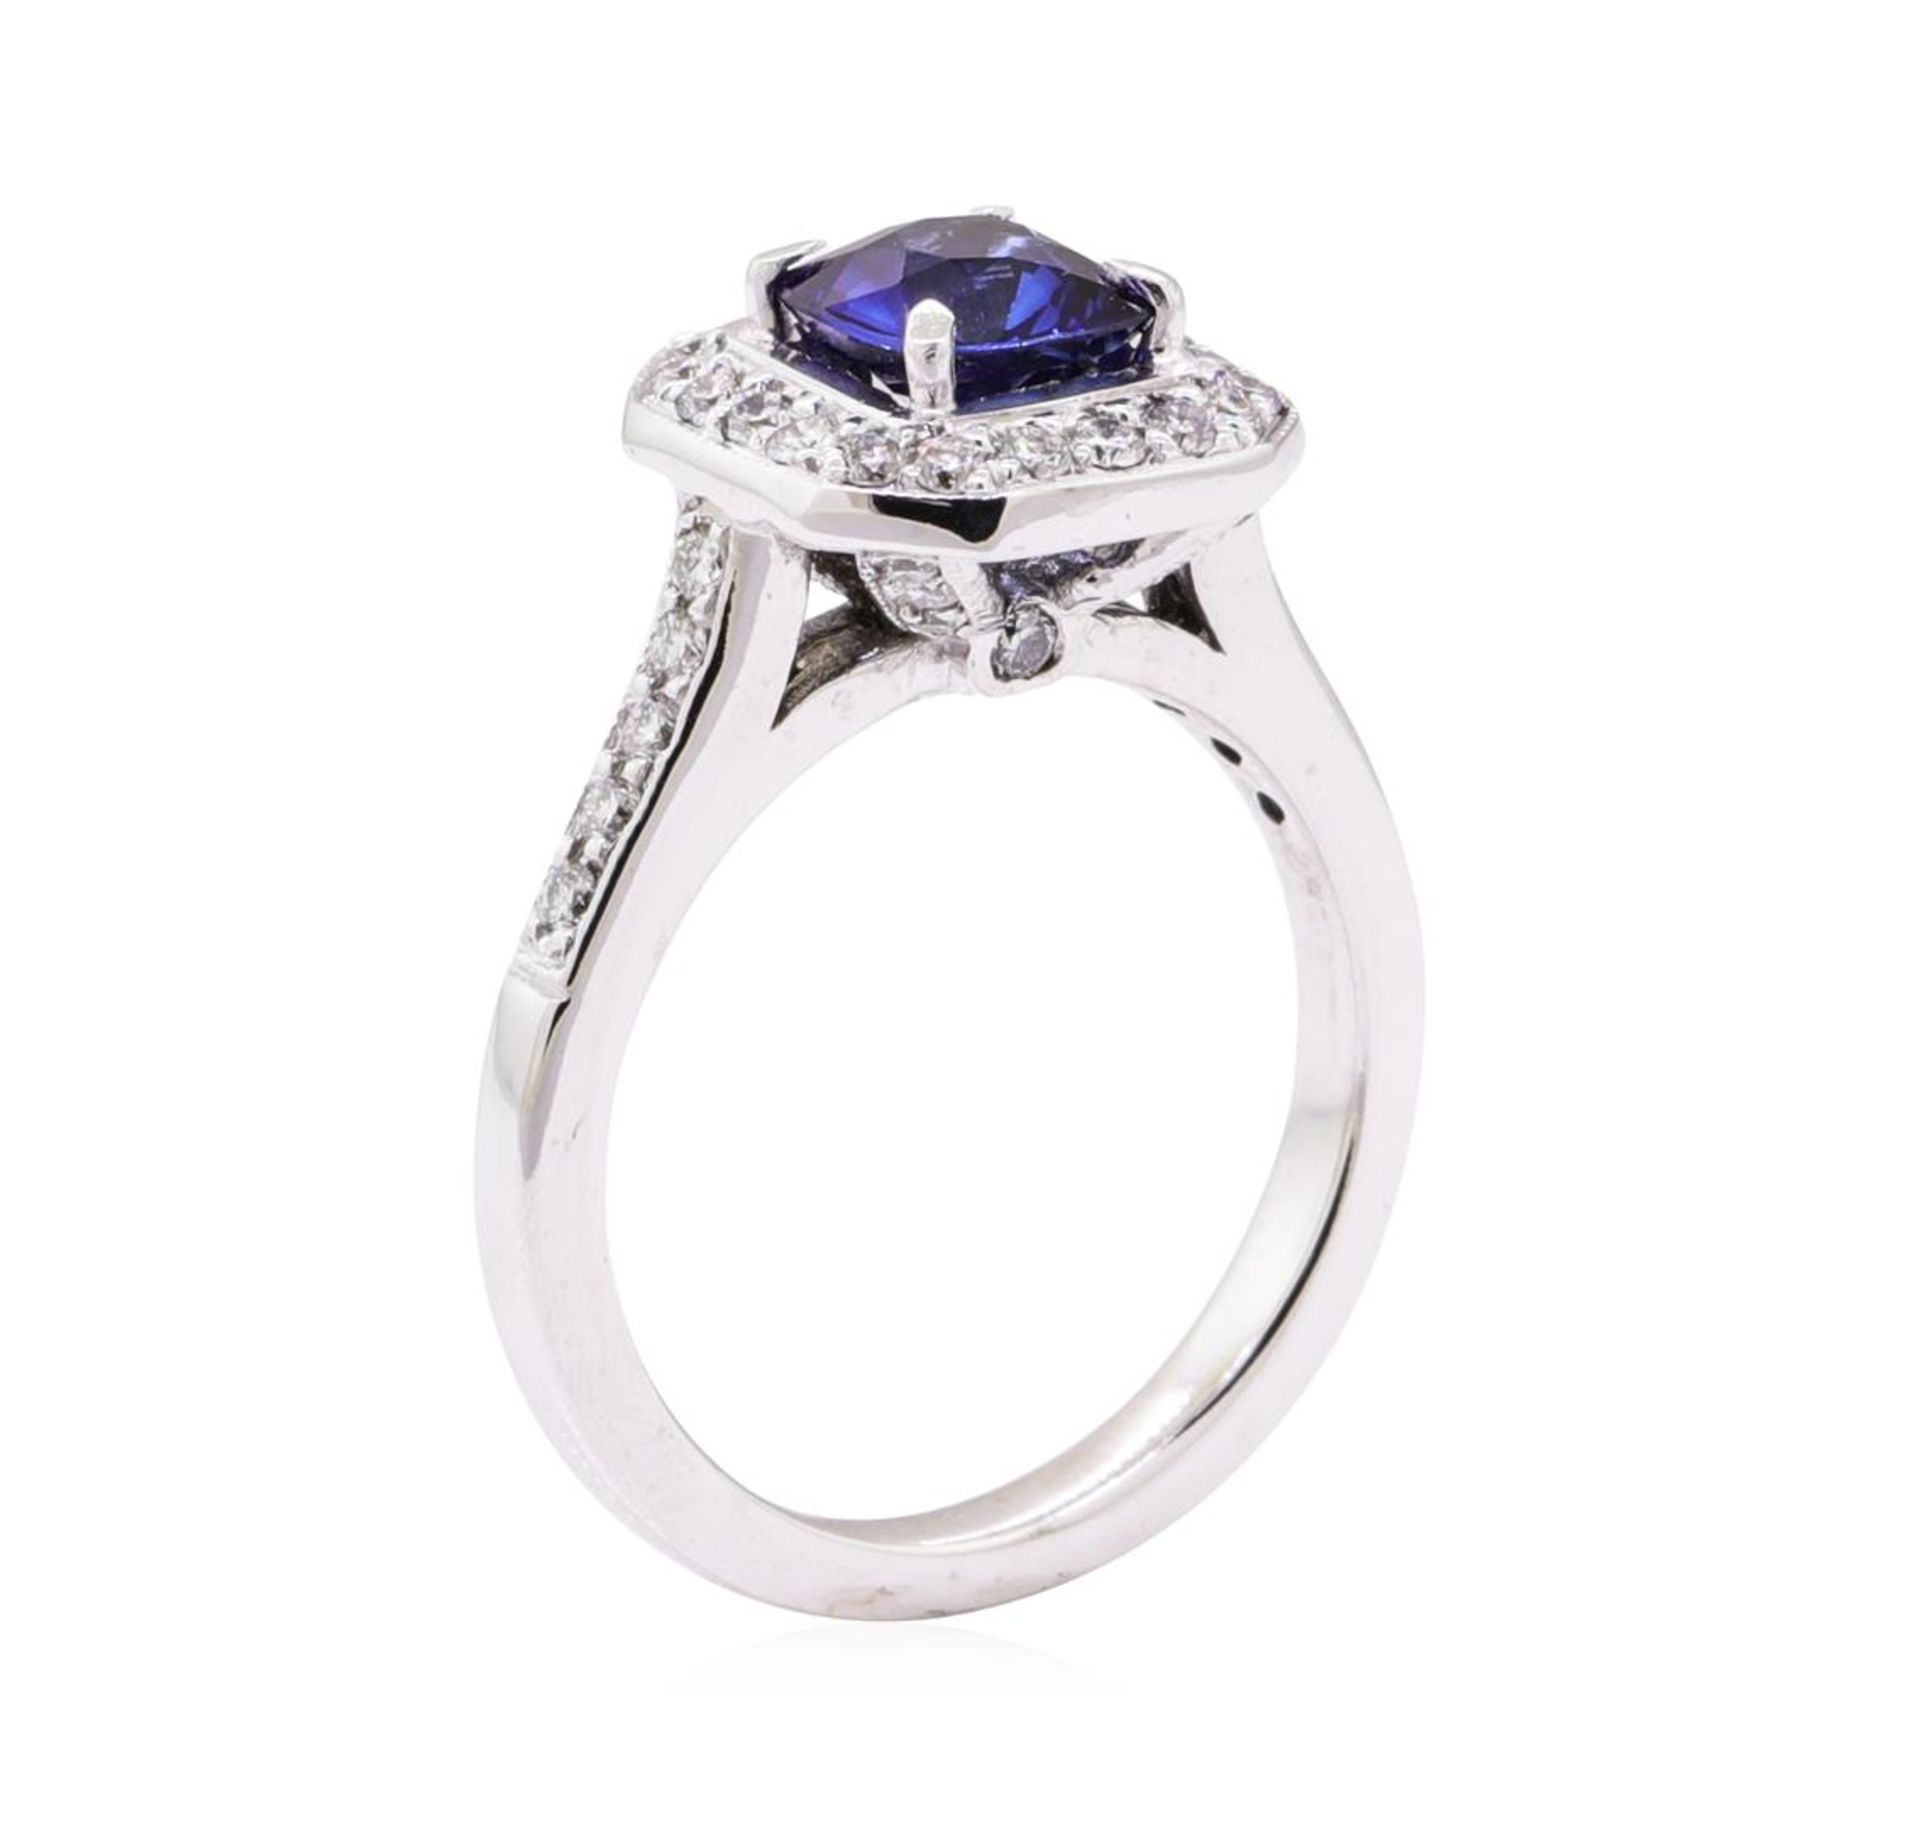 1.64 ctw Blue Sapphire And Diamond Ring - 14KT White Gold - Image 4 of 5